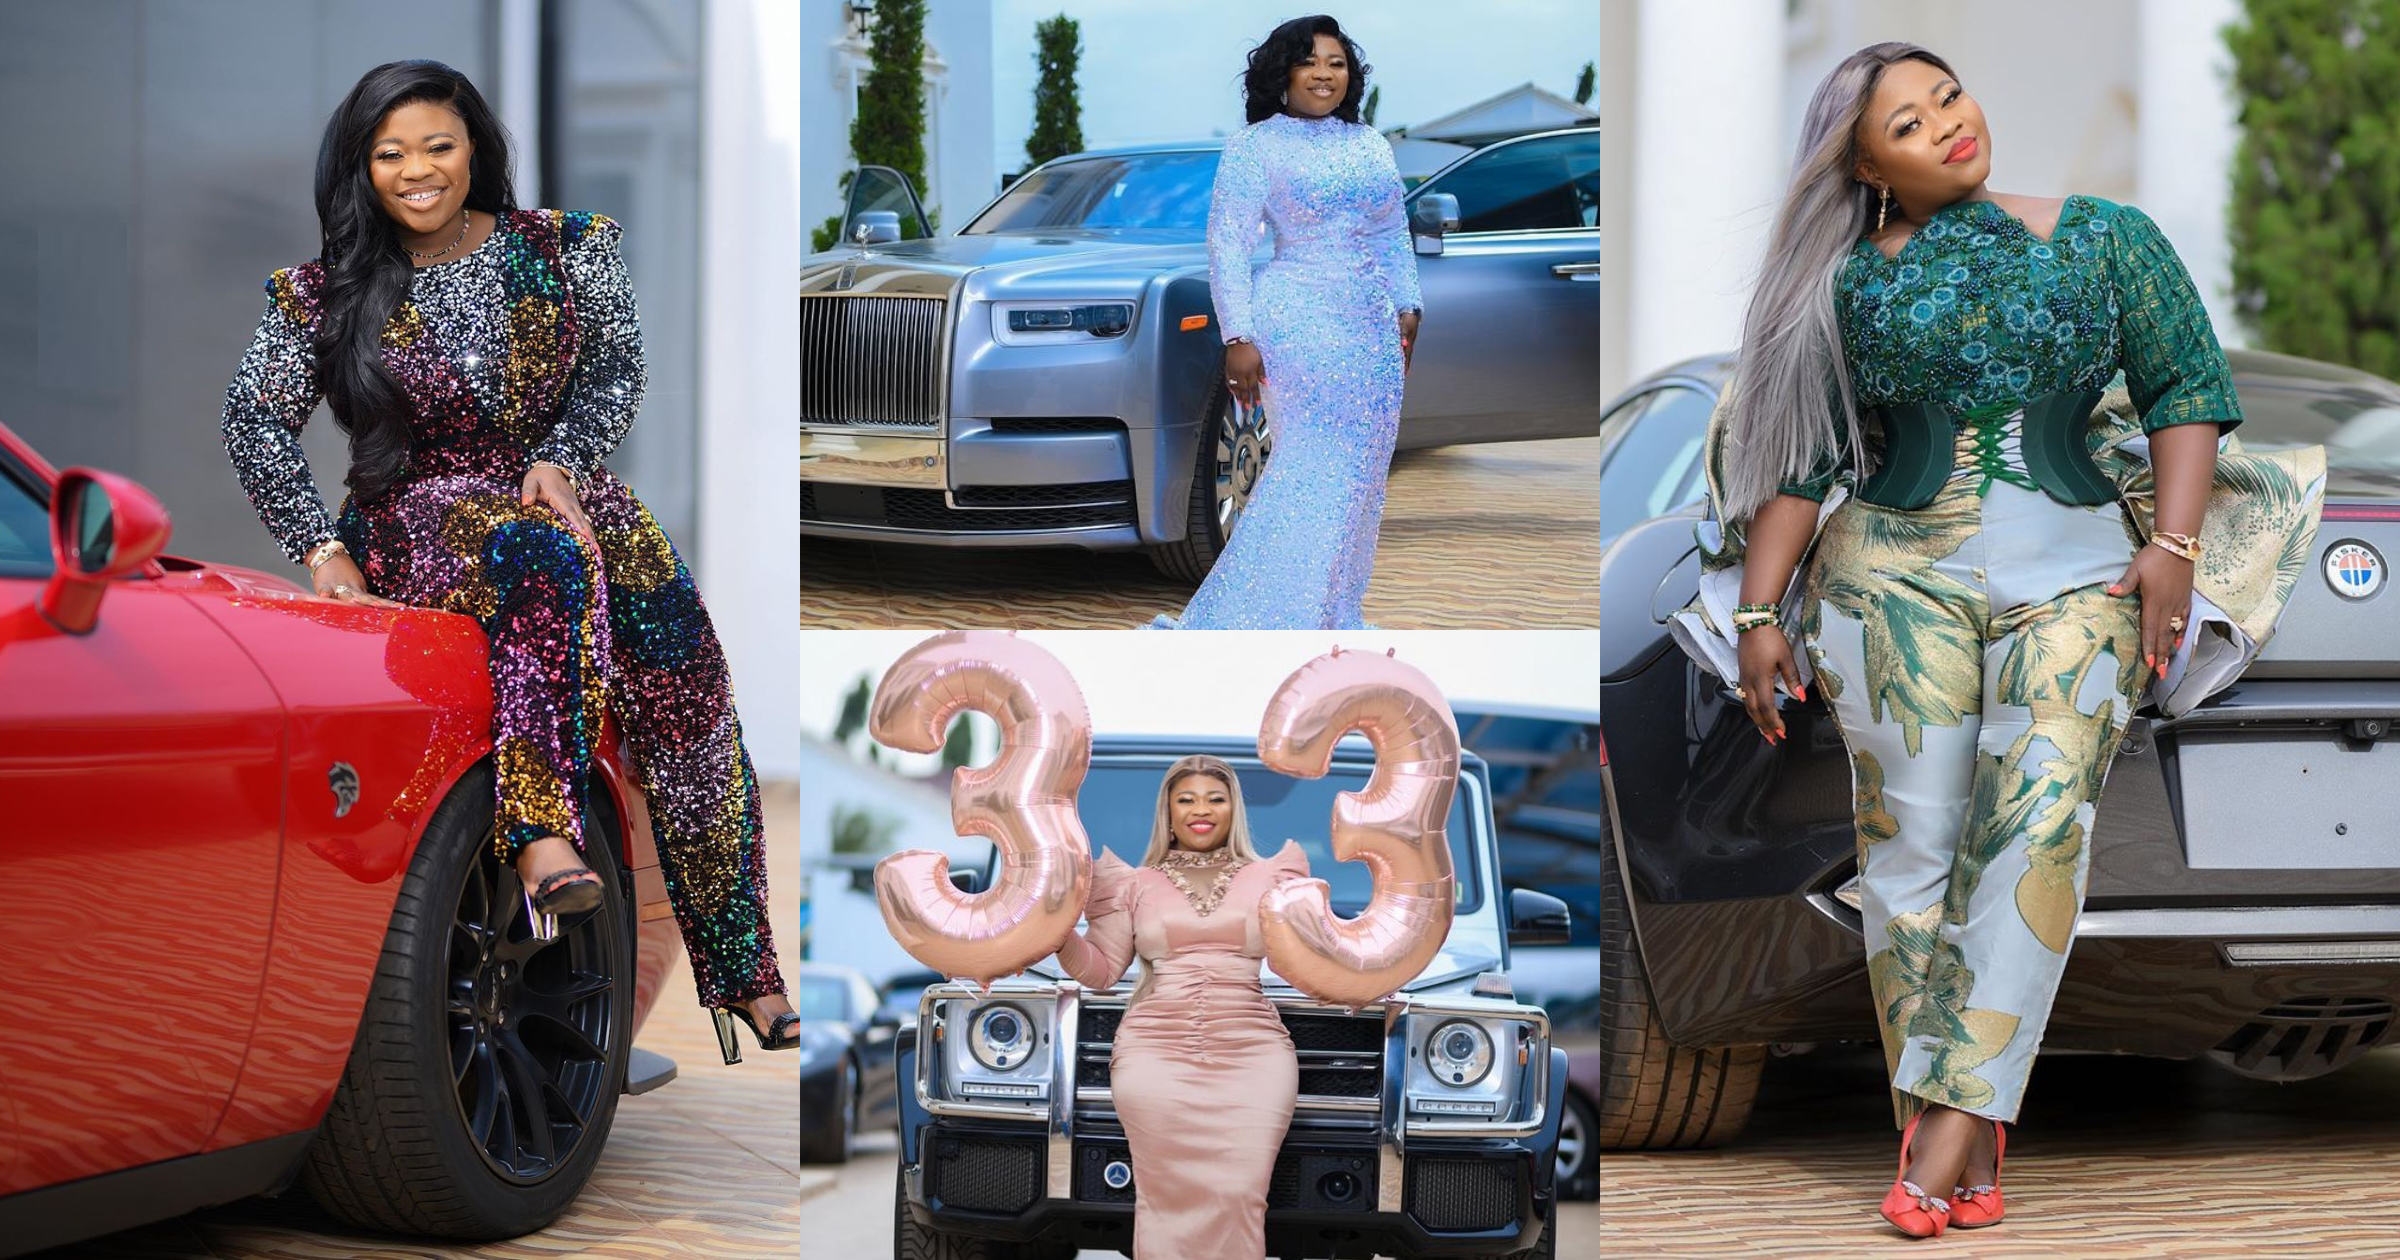 Obofour's wife shows off cars in beautiful 33rd birthday photos